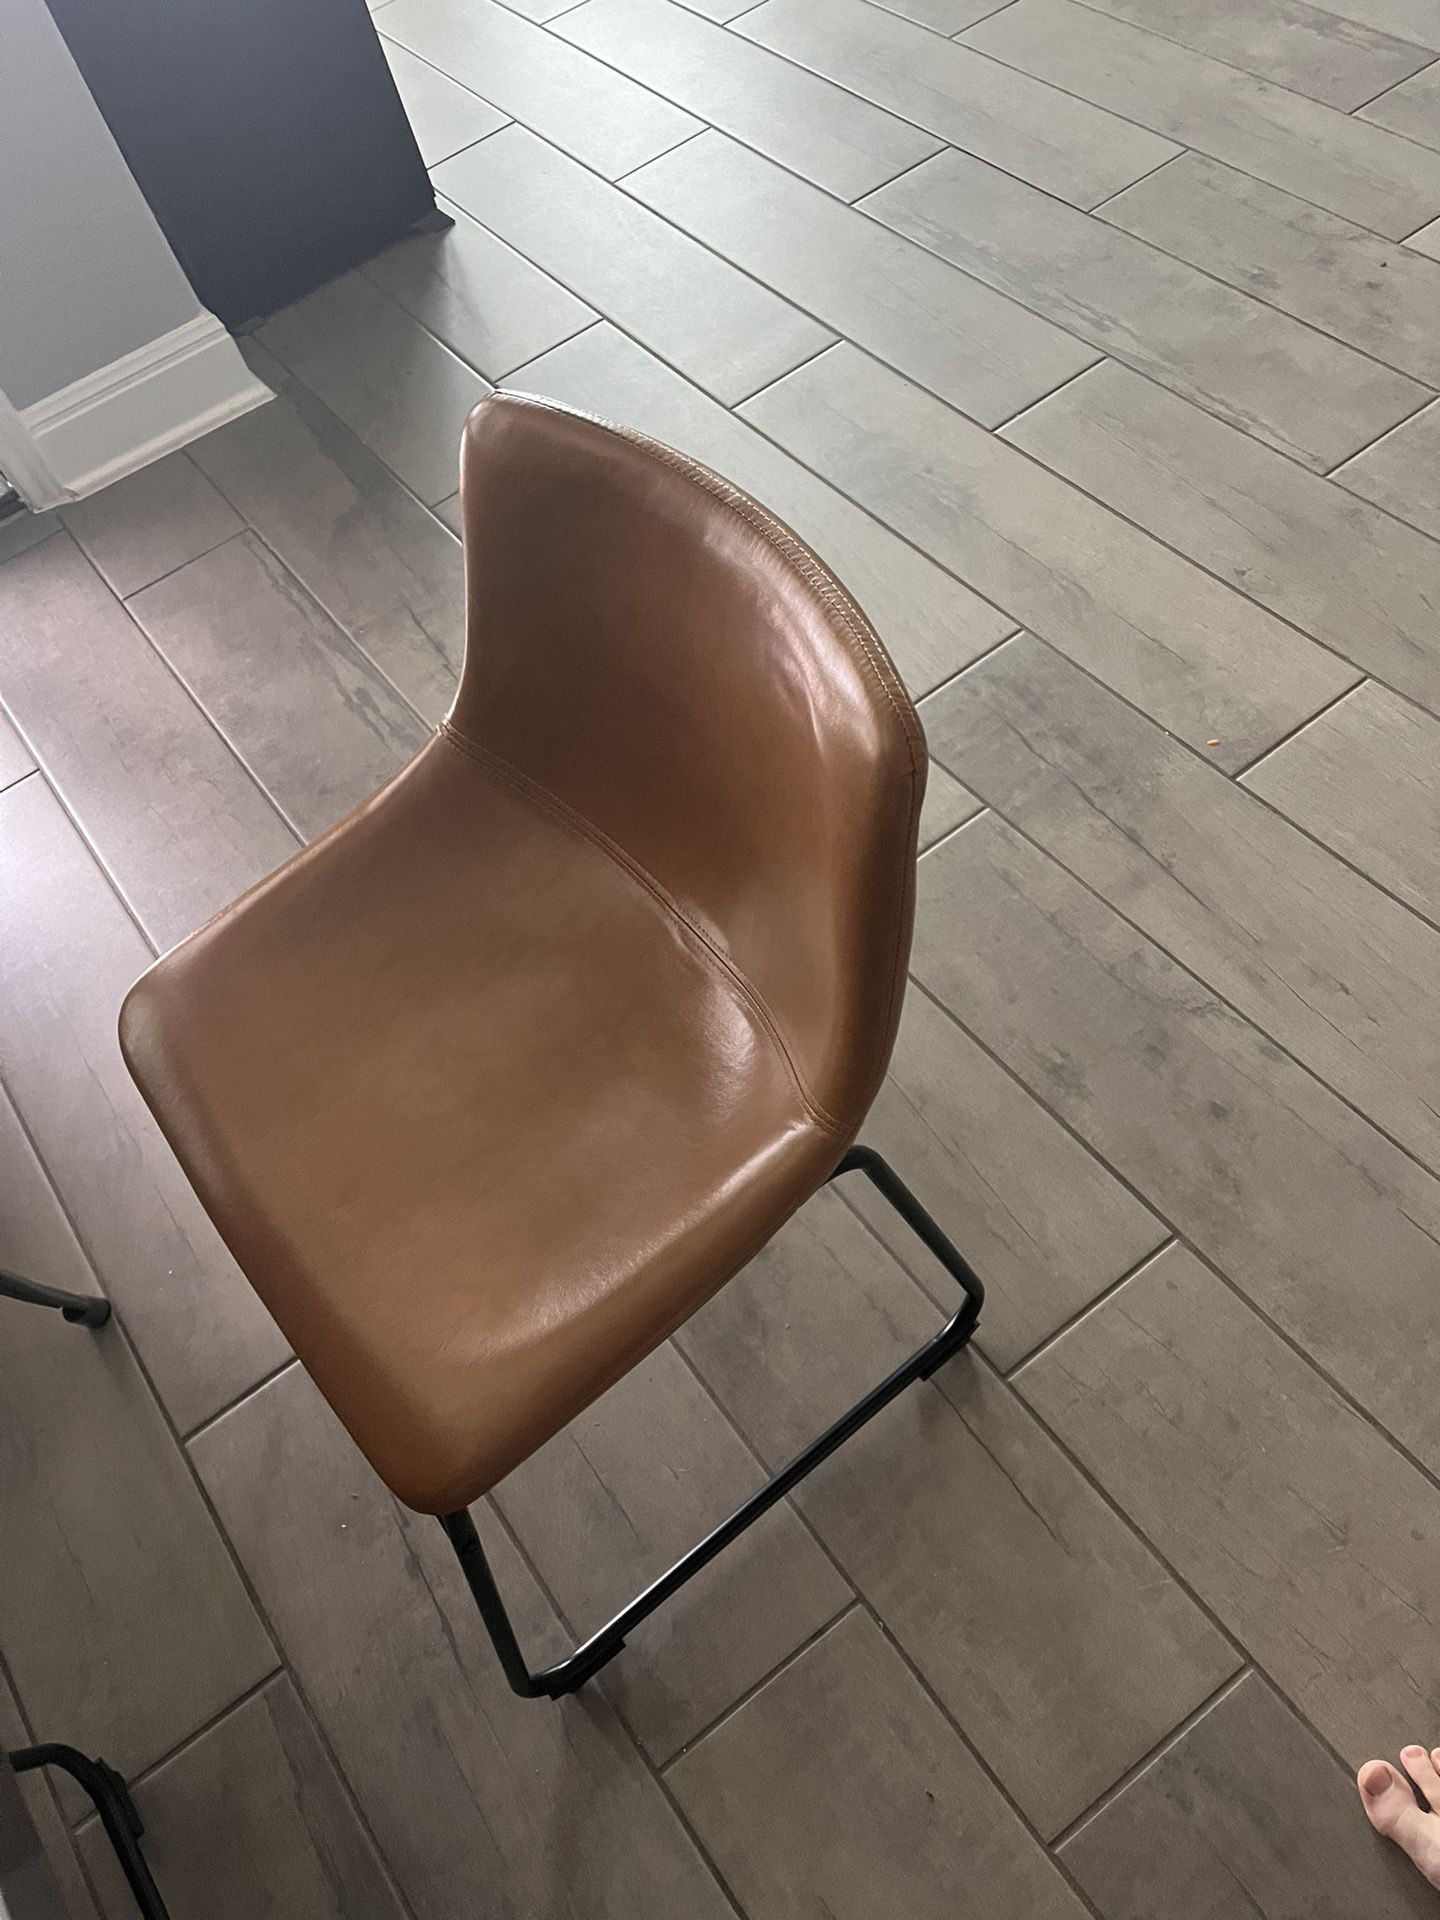 Leather Dining Chairs And Barstools (brand New )